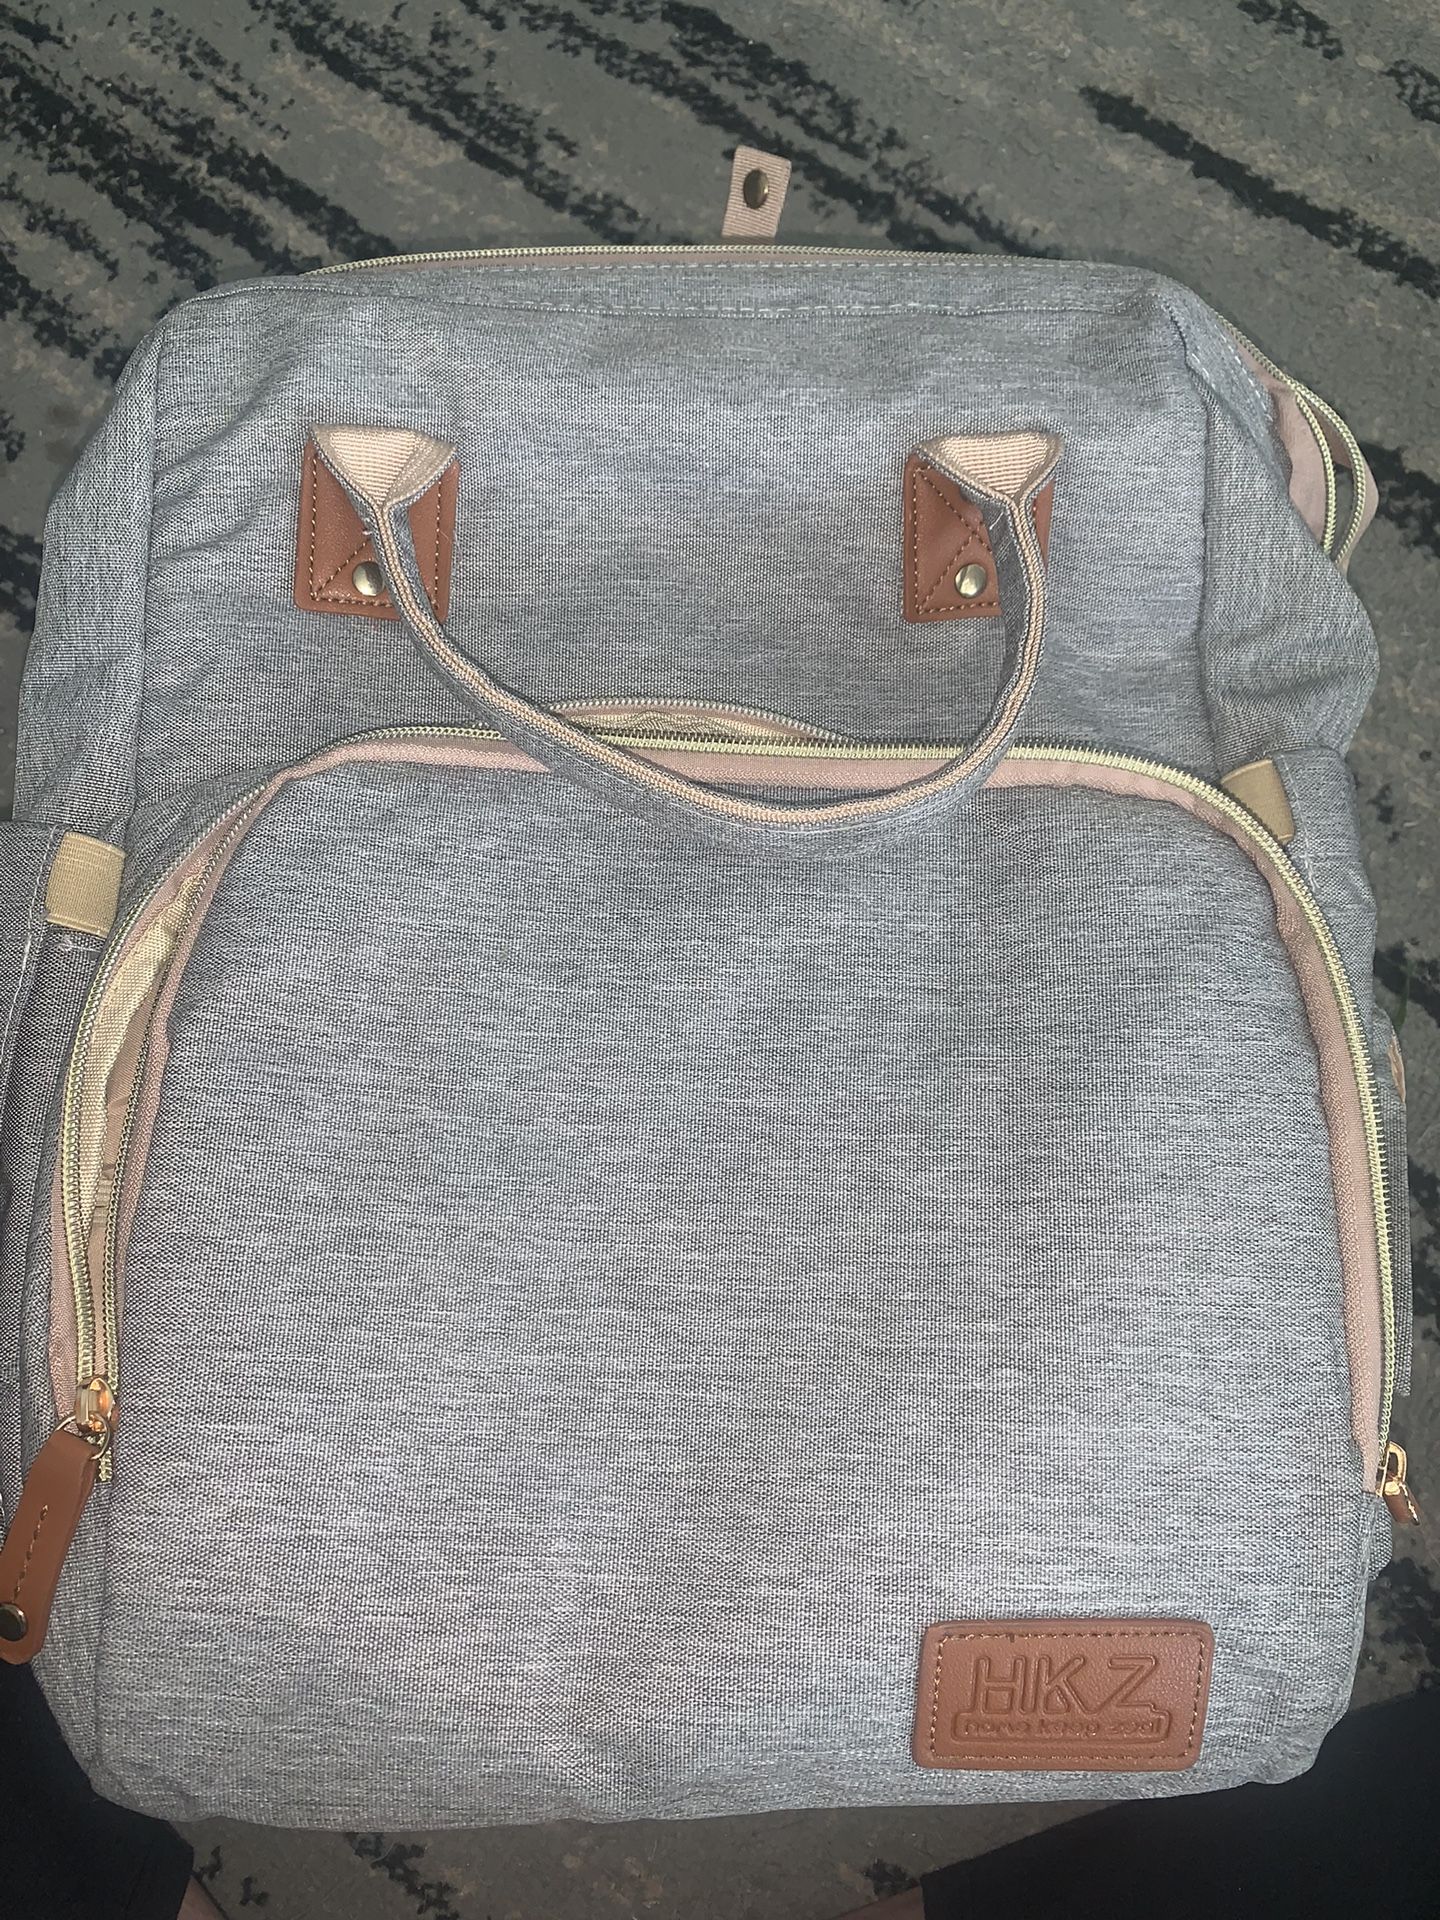 Diaper Bag & Changing Table 